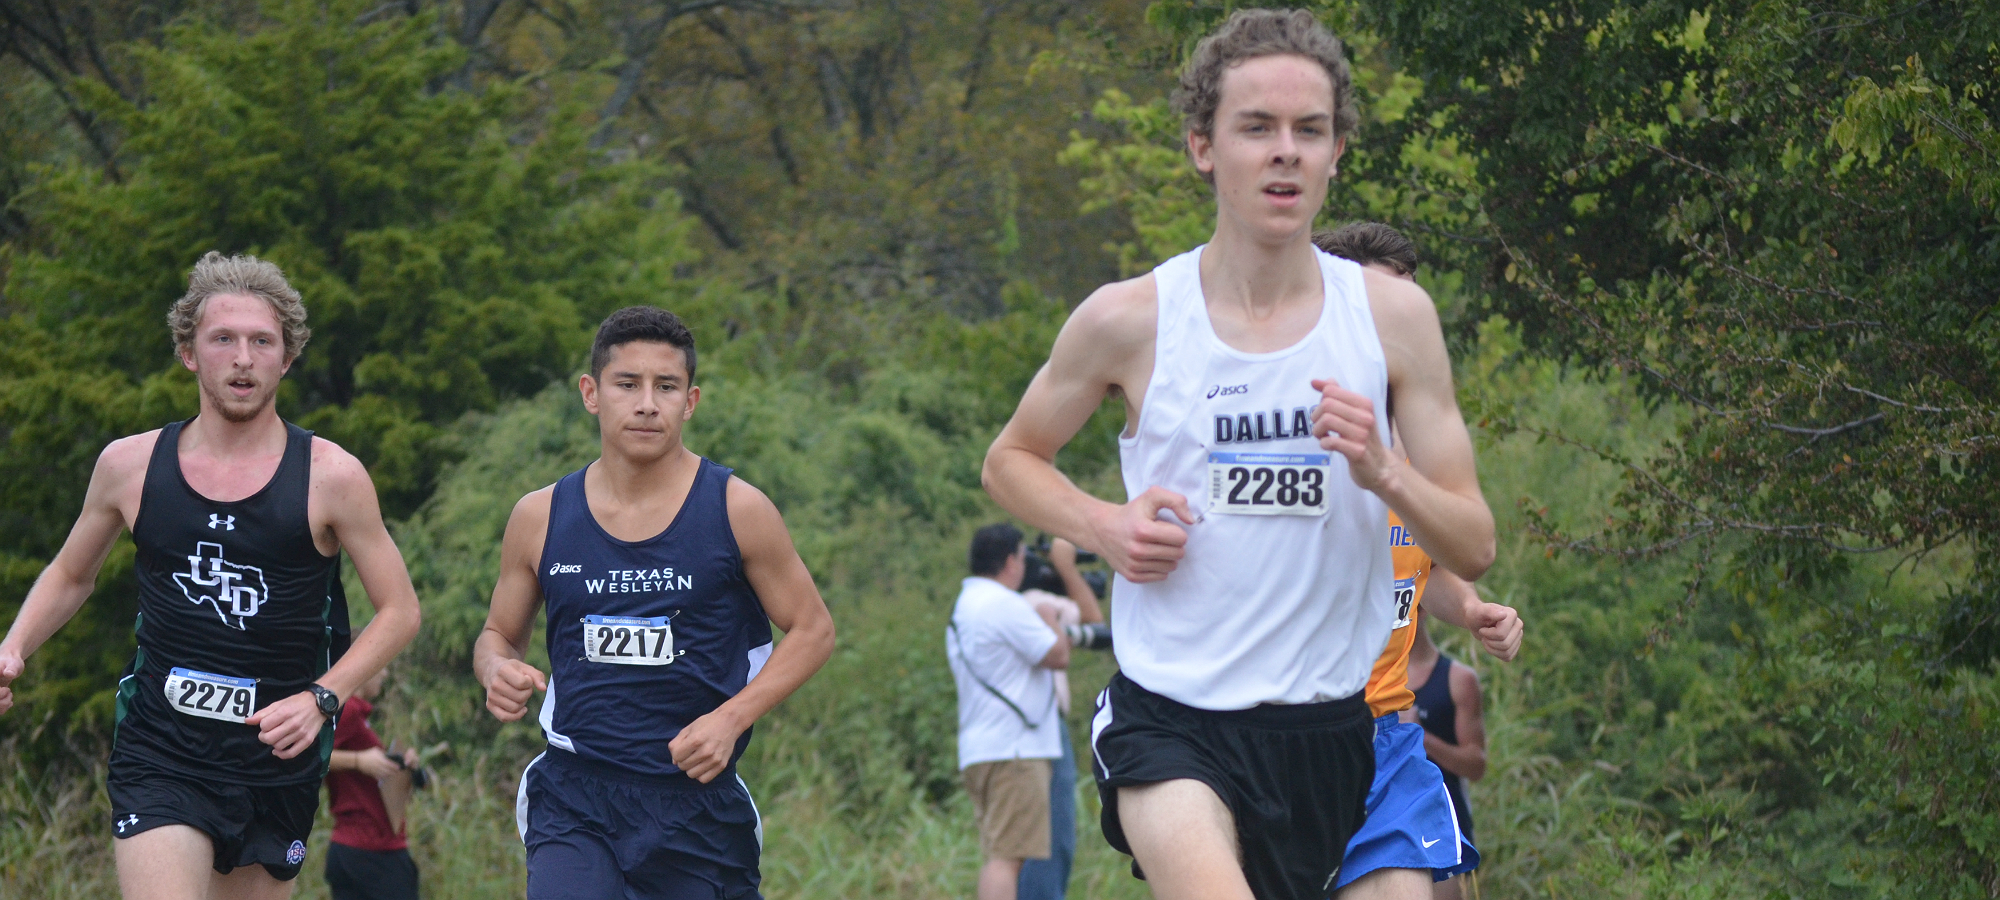 Hogan and James take Top 10 in Home Invitational on Saturday